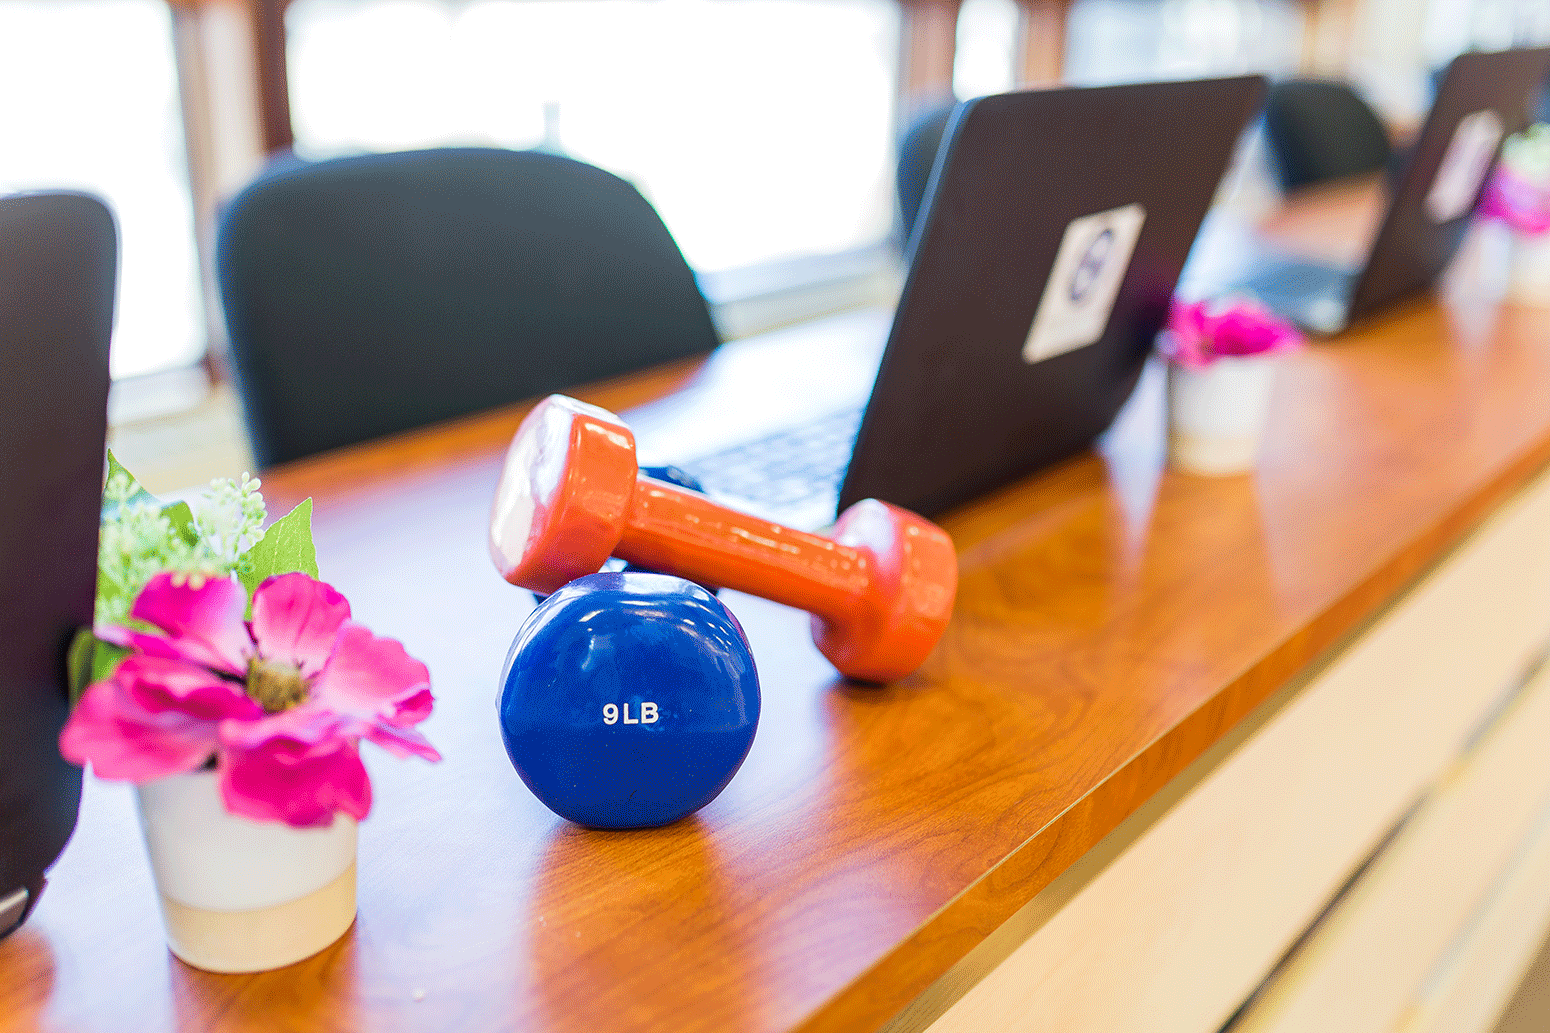 hand weights resting on a desk